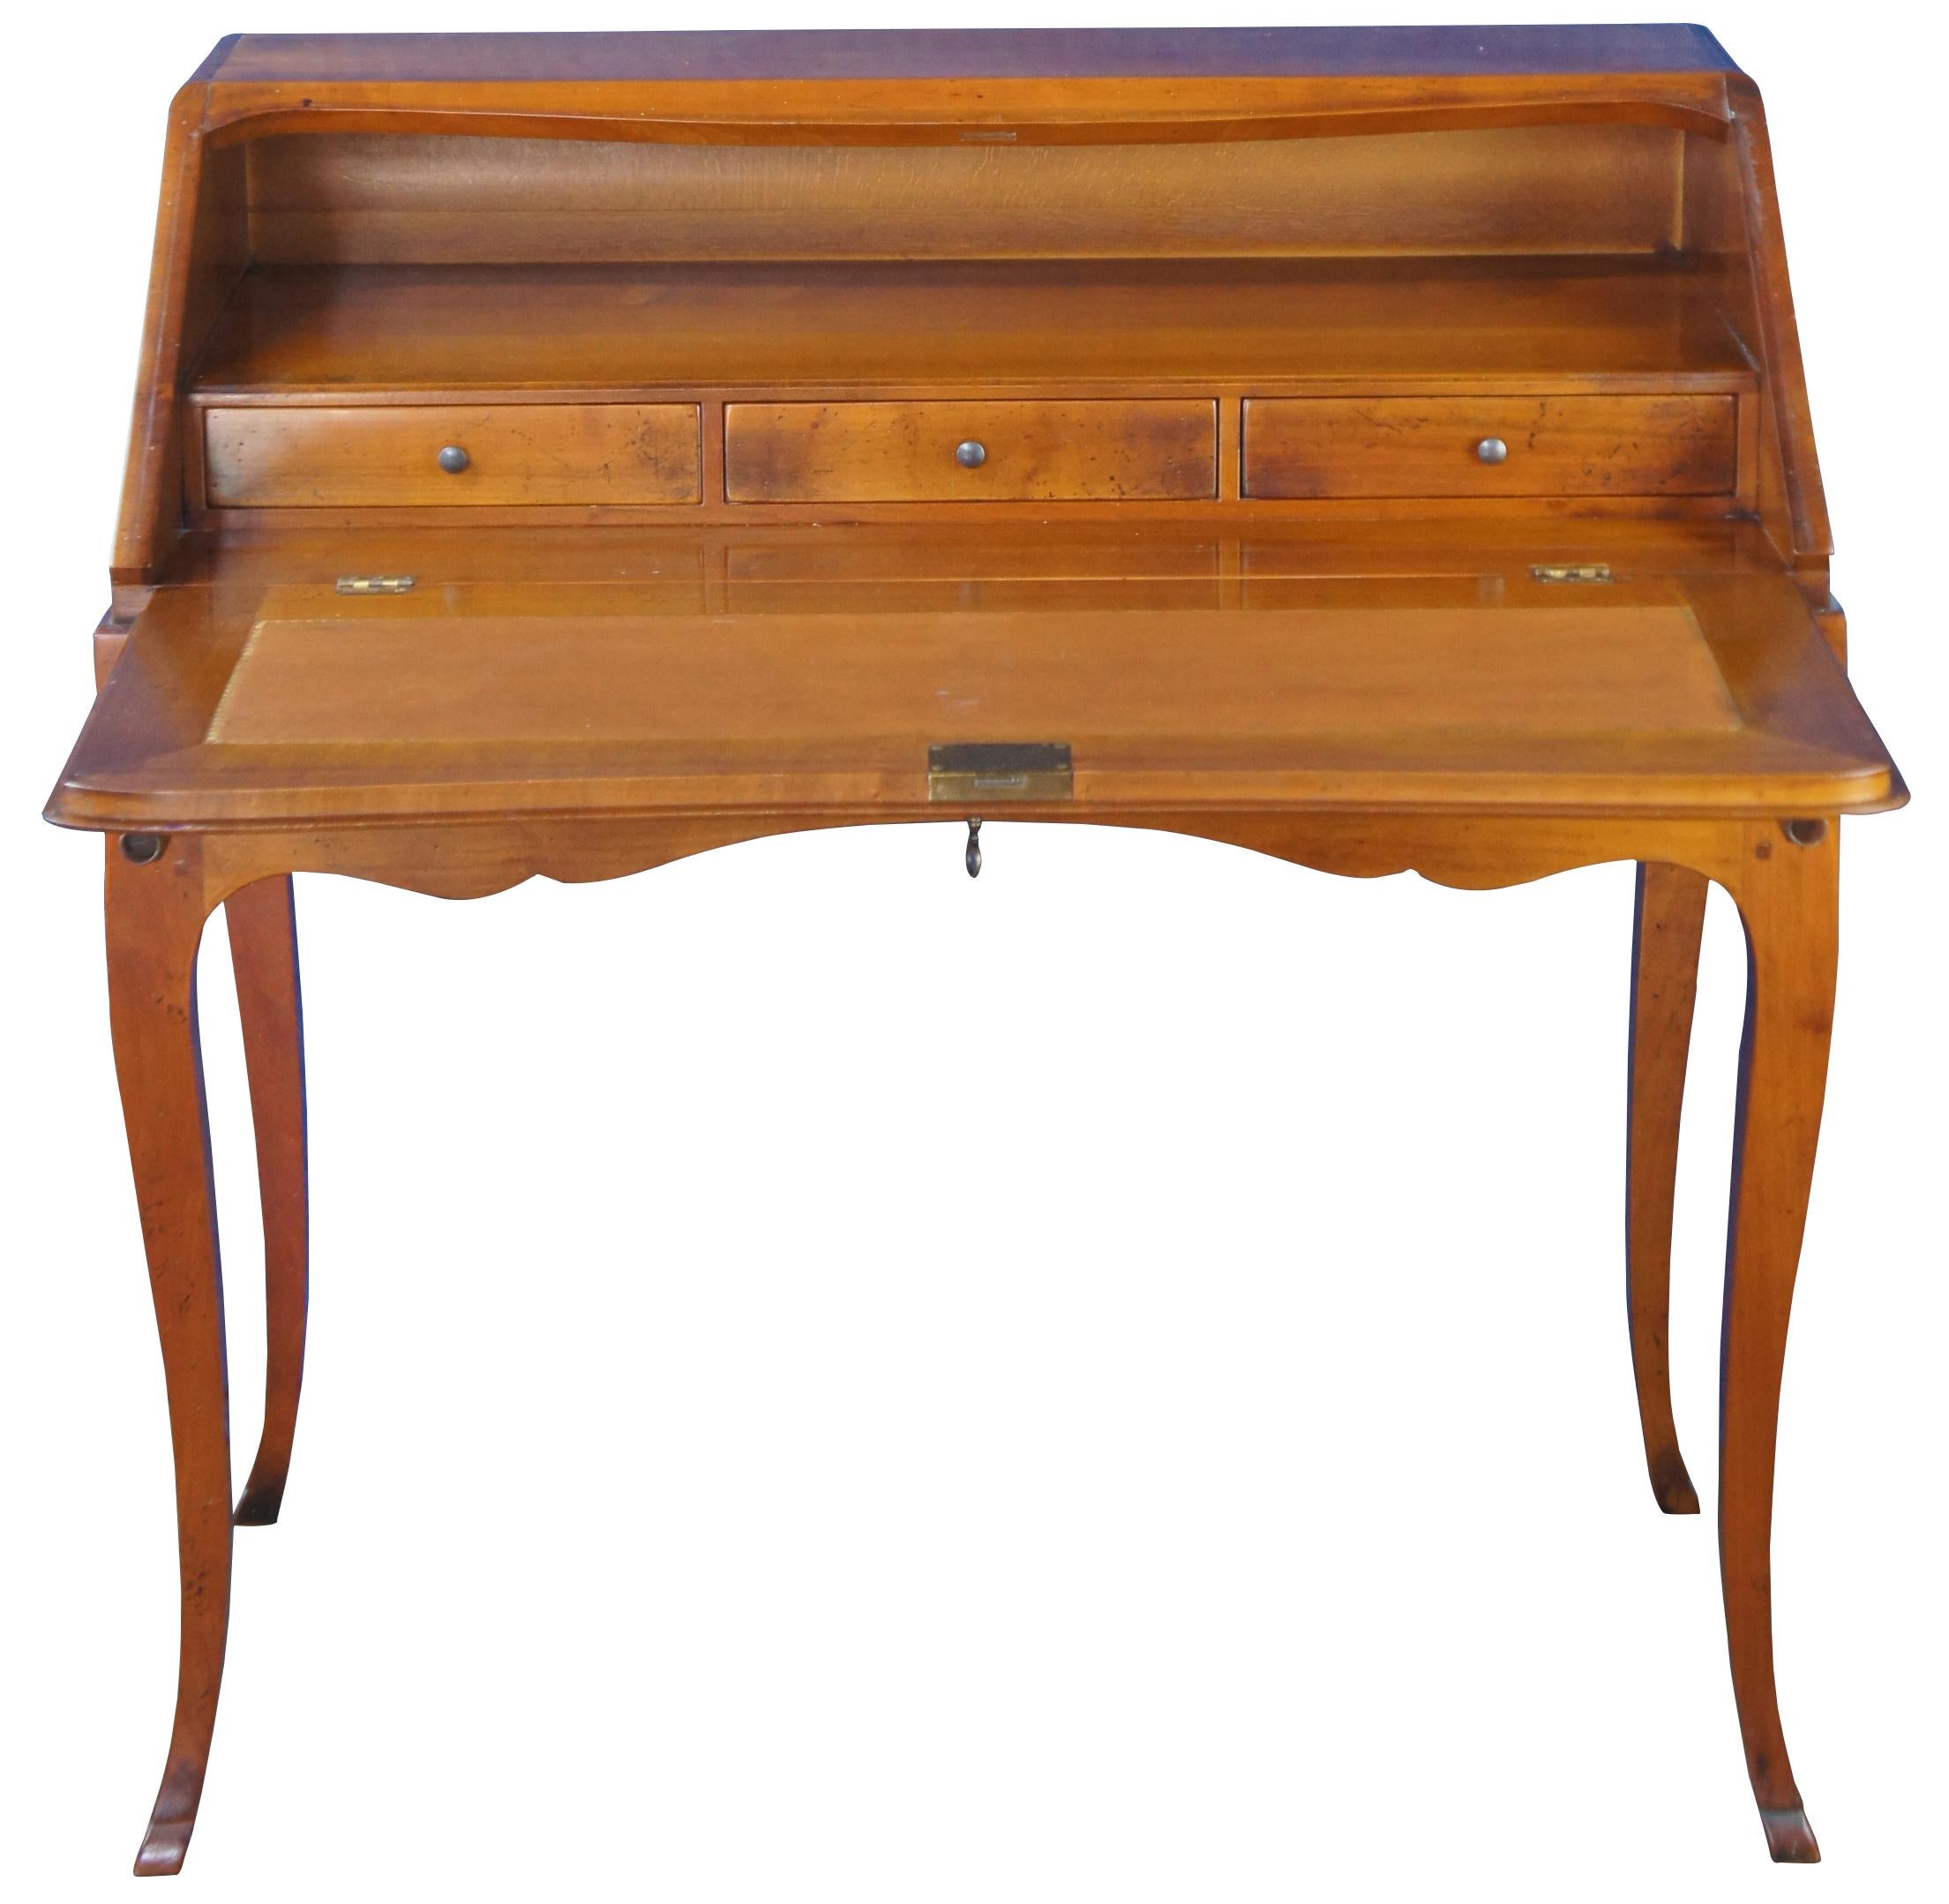 A magnificent 20th century French Provincial Bureau De Dame. Burea de Dame translates to ladies office. A writing desk that is often petite yet functional. Made of maple with a serpentine form and lockable drop front featuring a book or music rest